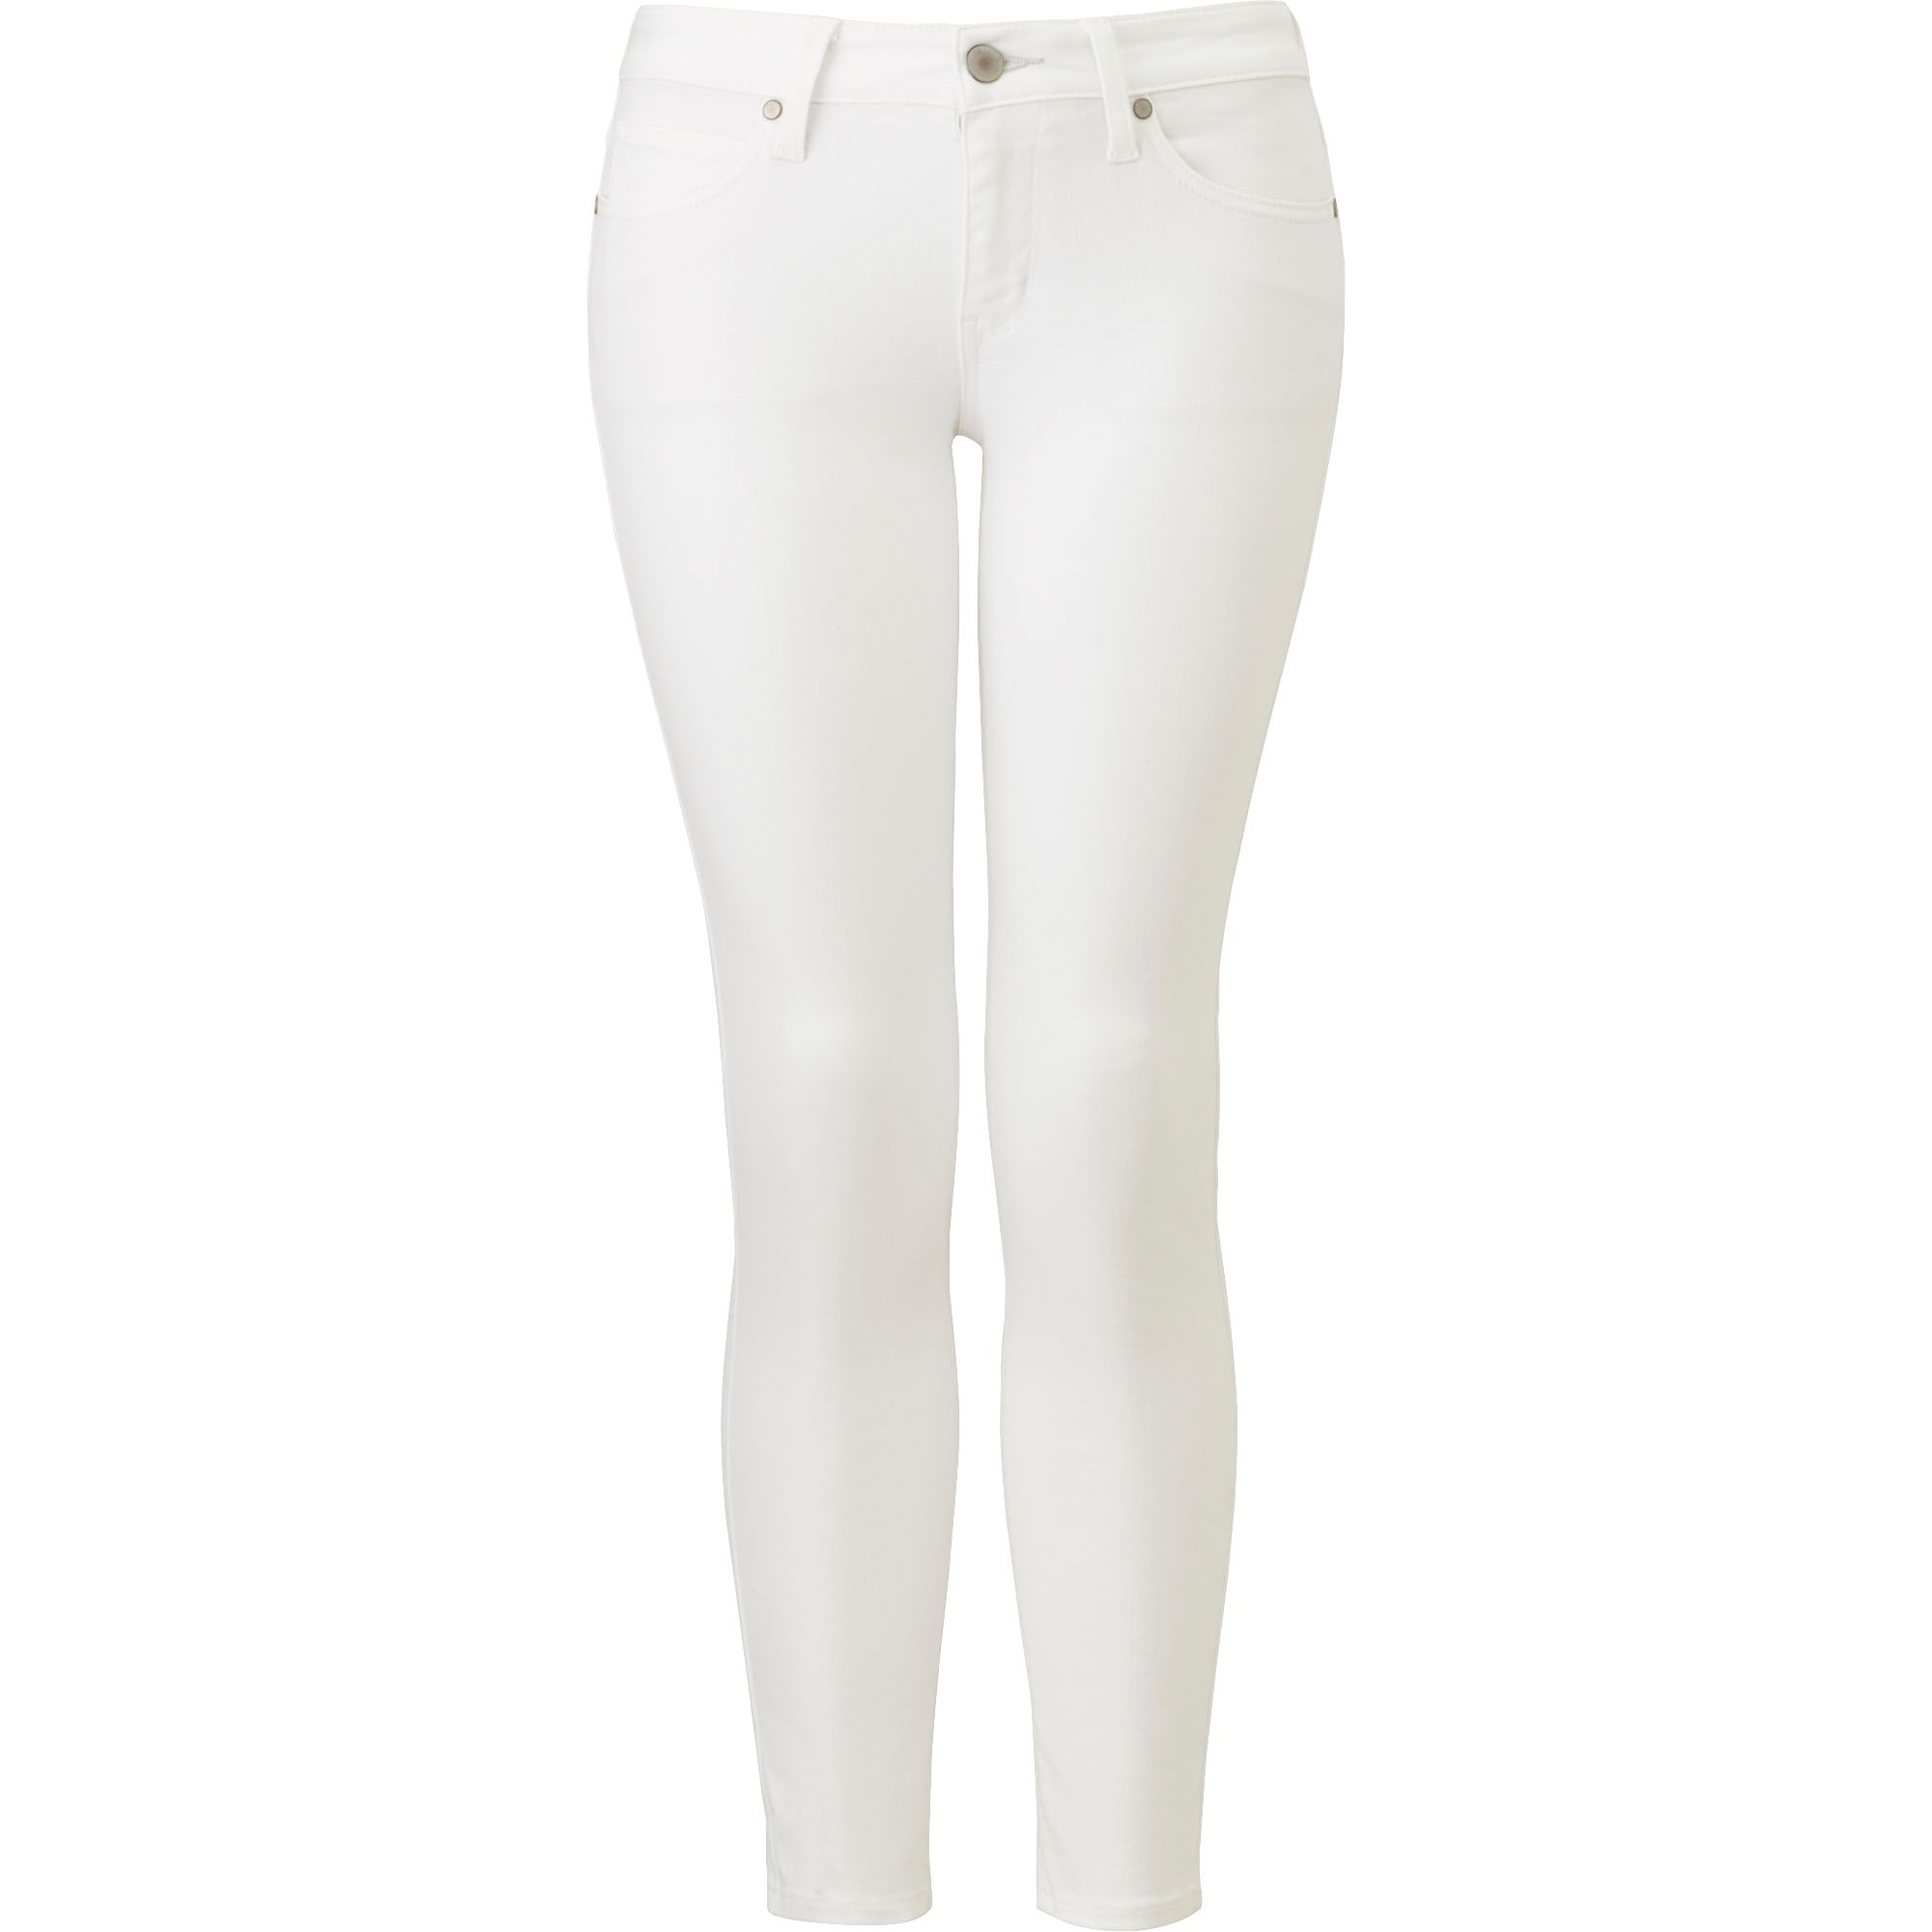 Uniqlo Women Ultra Stretch Ankle Jeans in White (OFF WHITE) | Lyst